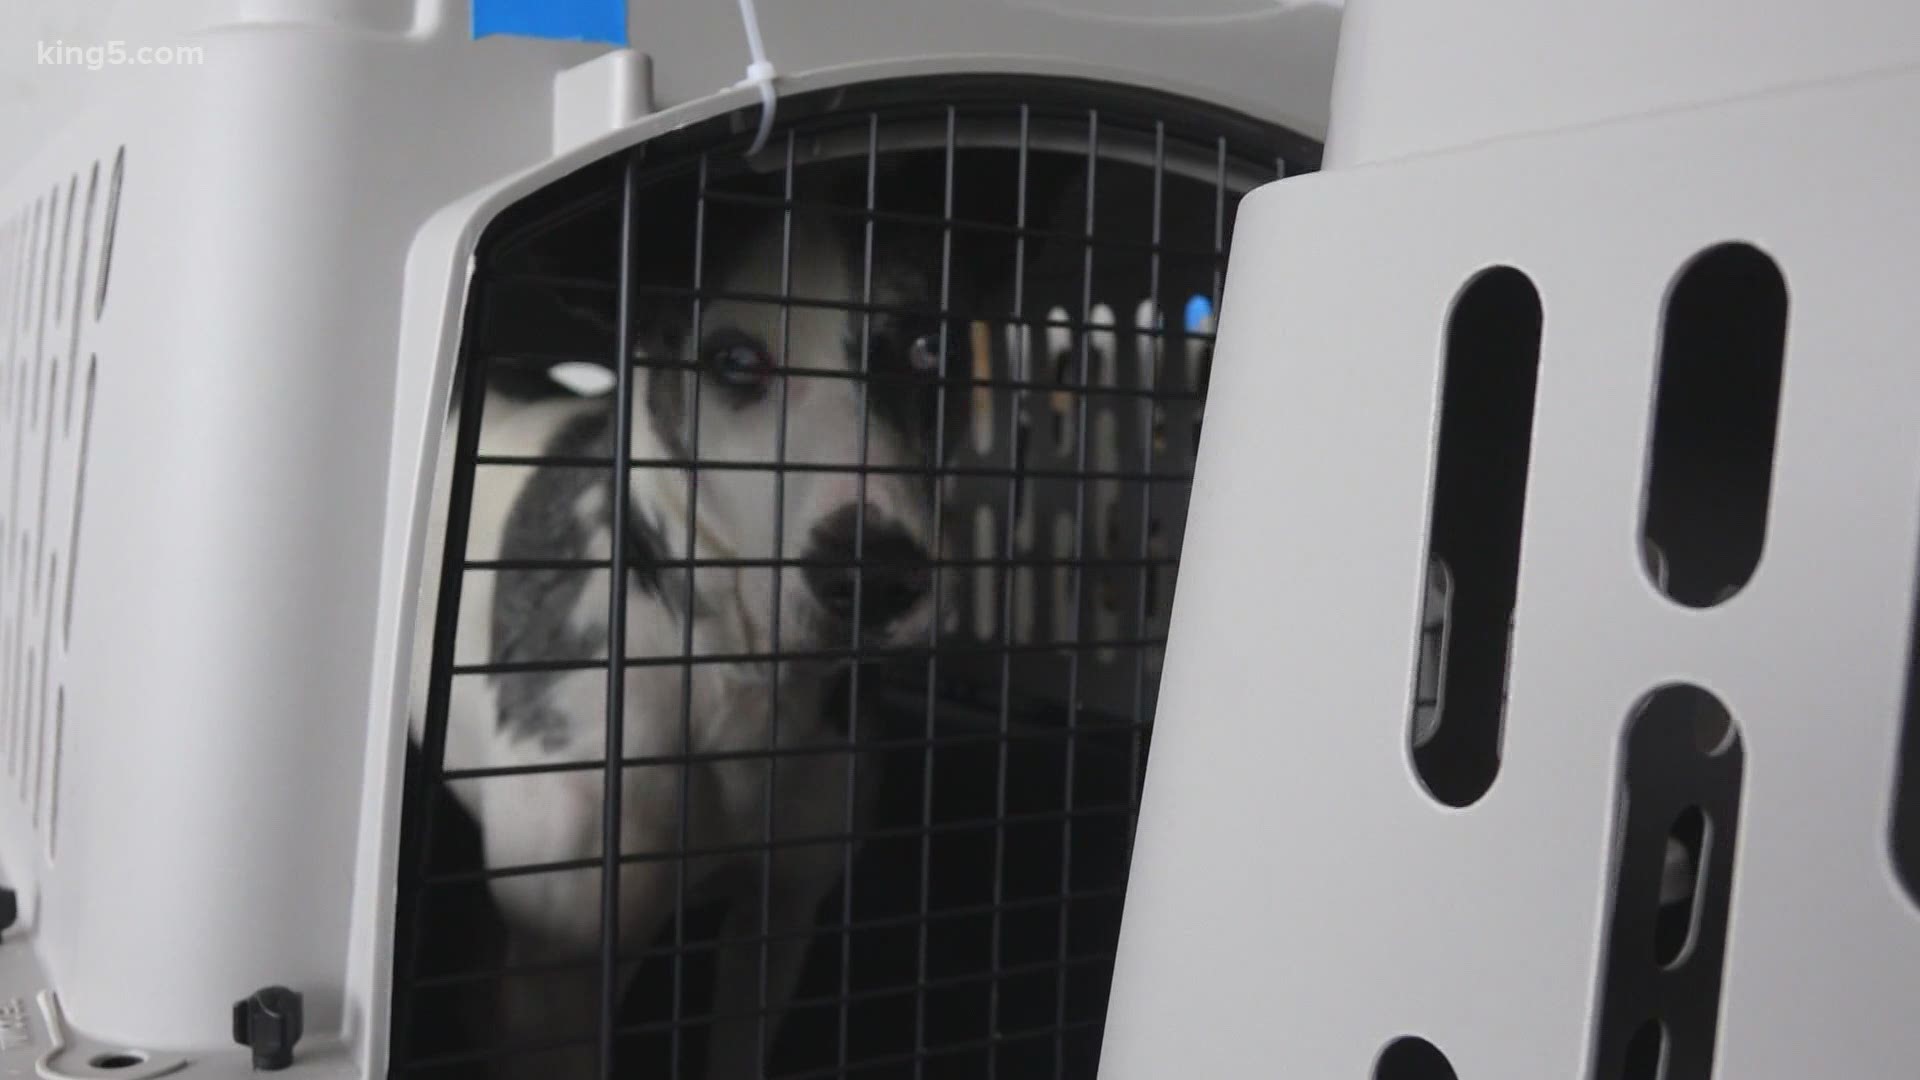 The Maui Humane Society worked with Greater Good Charities and Wings of Rescue to send over 600 pets to the mainland on the "Paws Across the Pacific" flight.